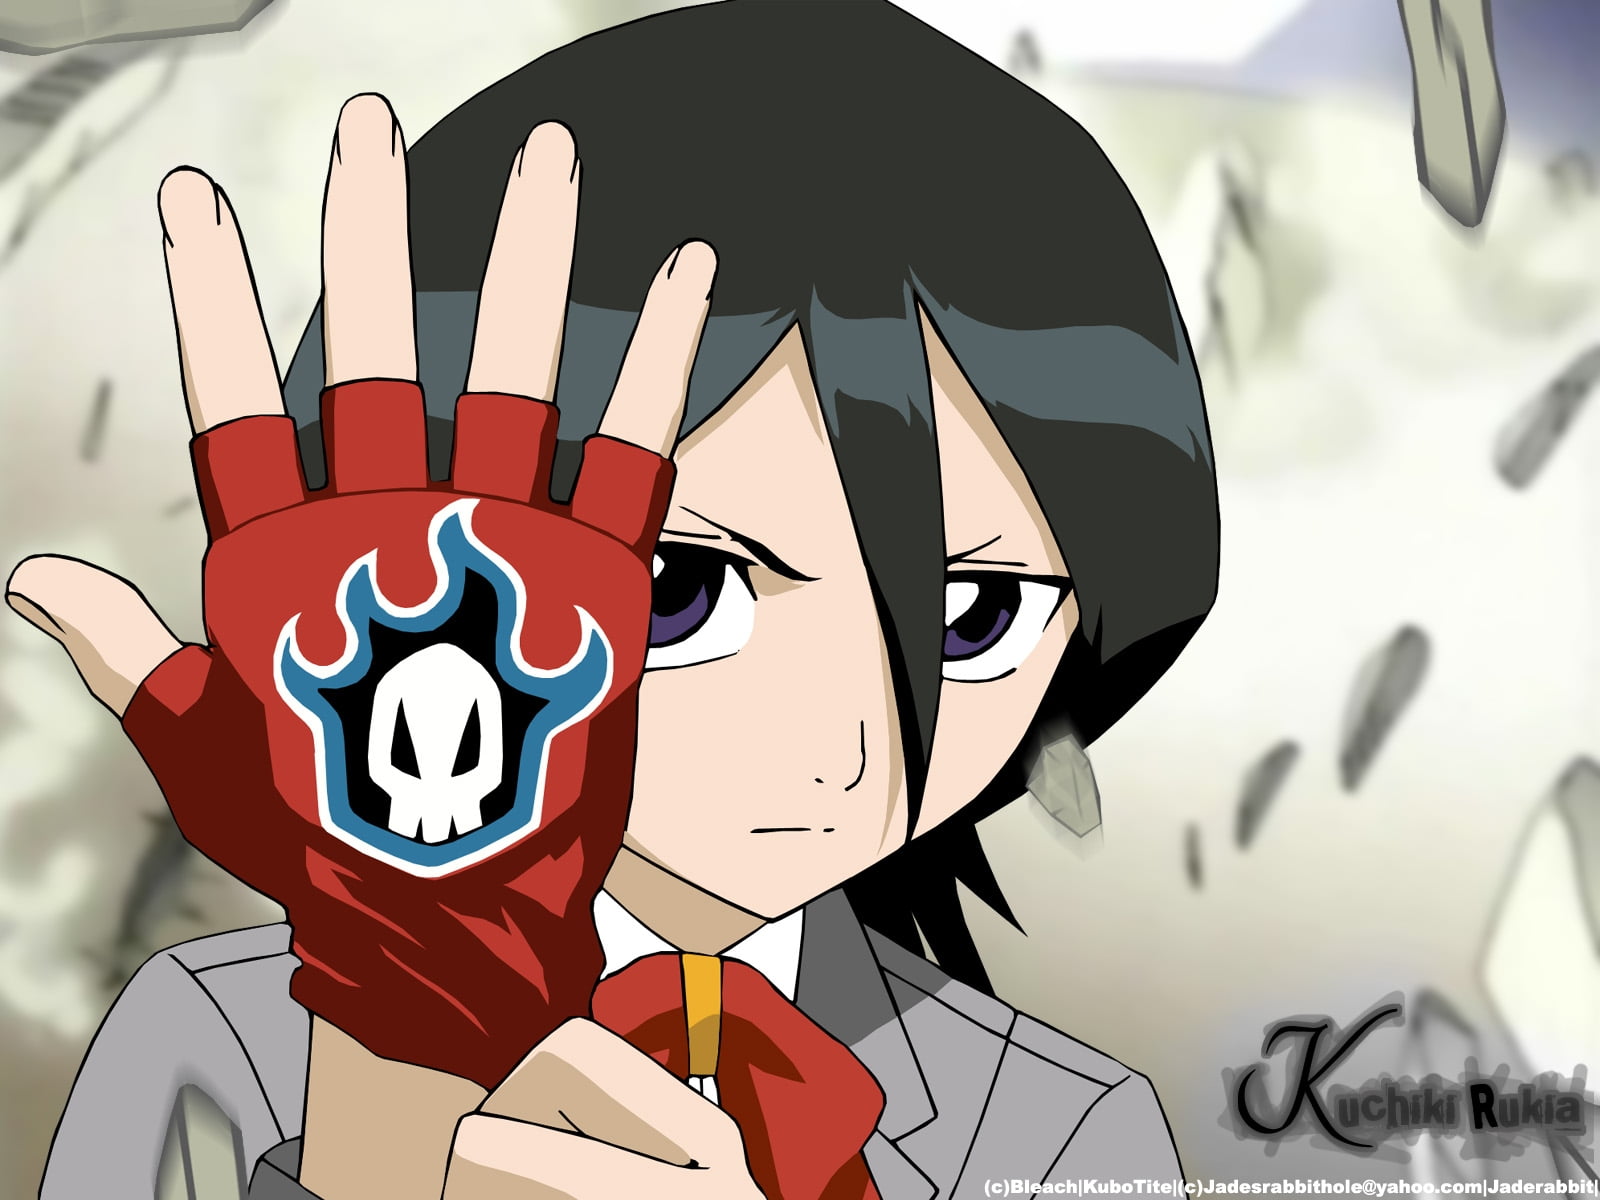 female anime character with red gloves